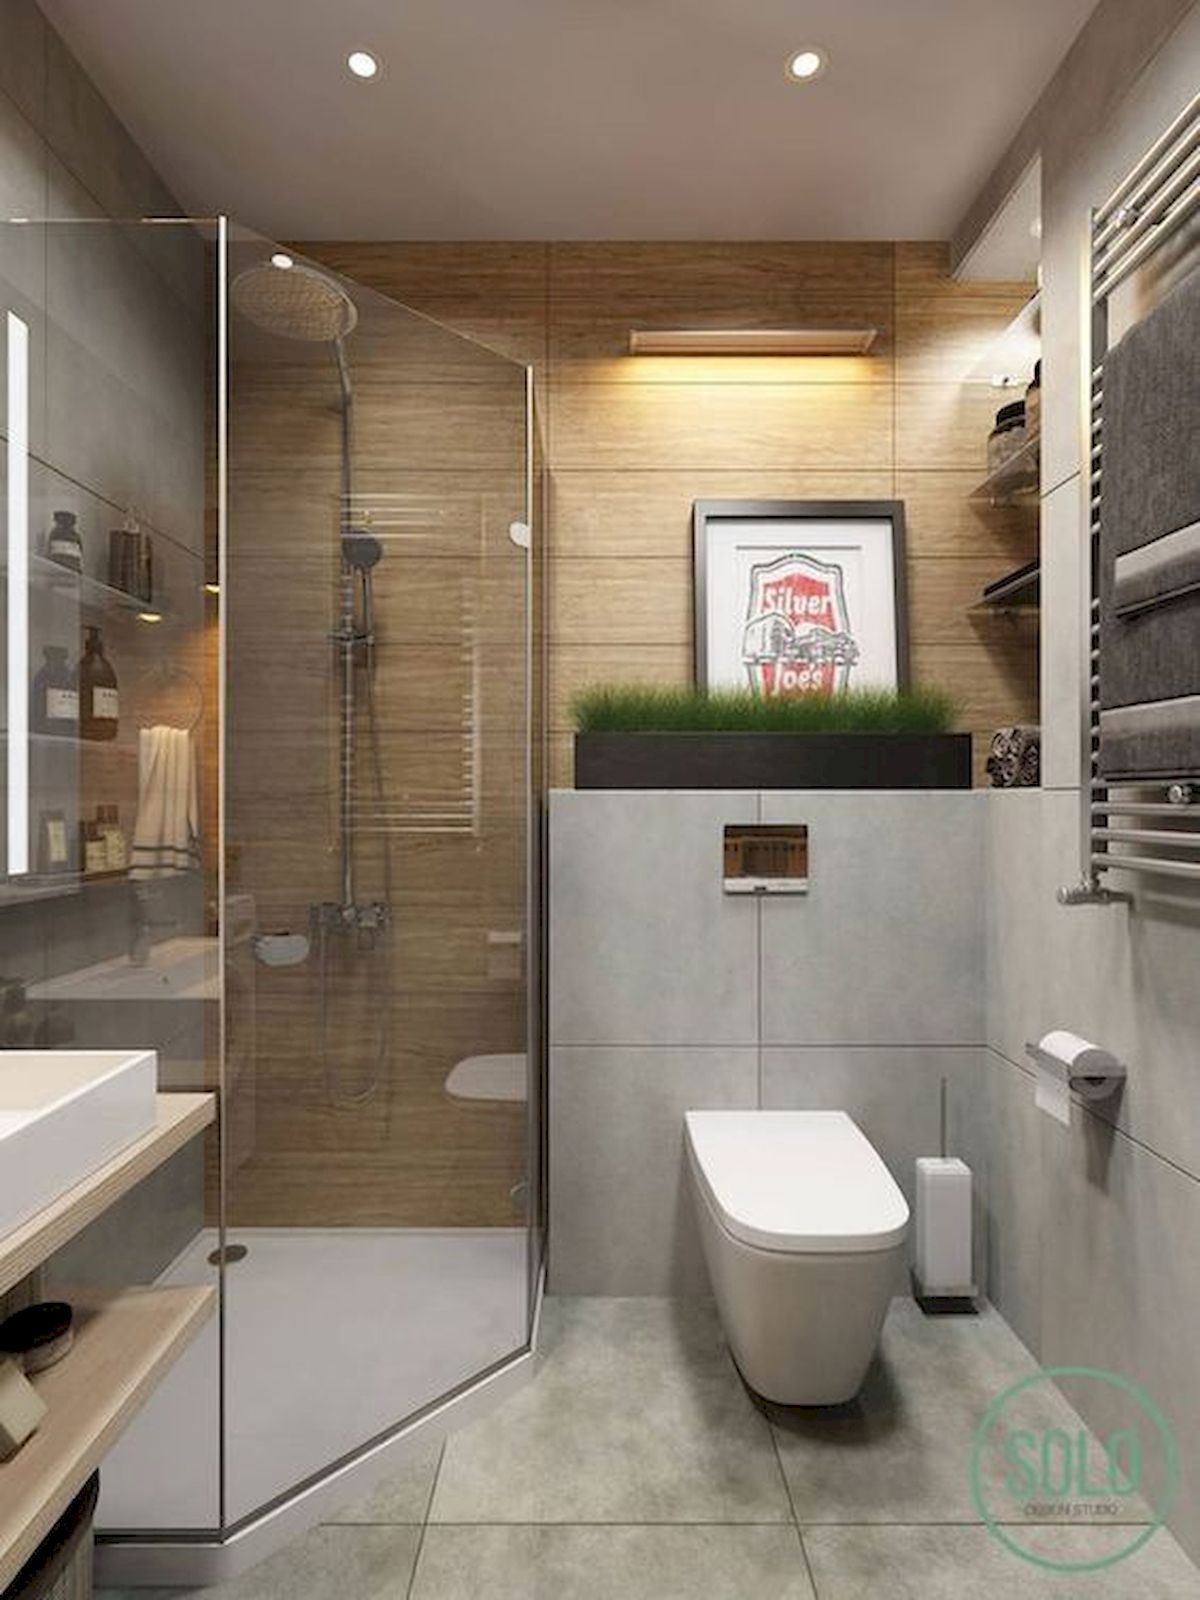 38 Amazing Small Bathroom Design Ideas That You Will Love (3)